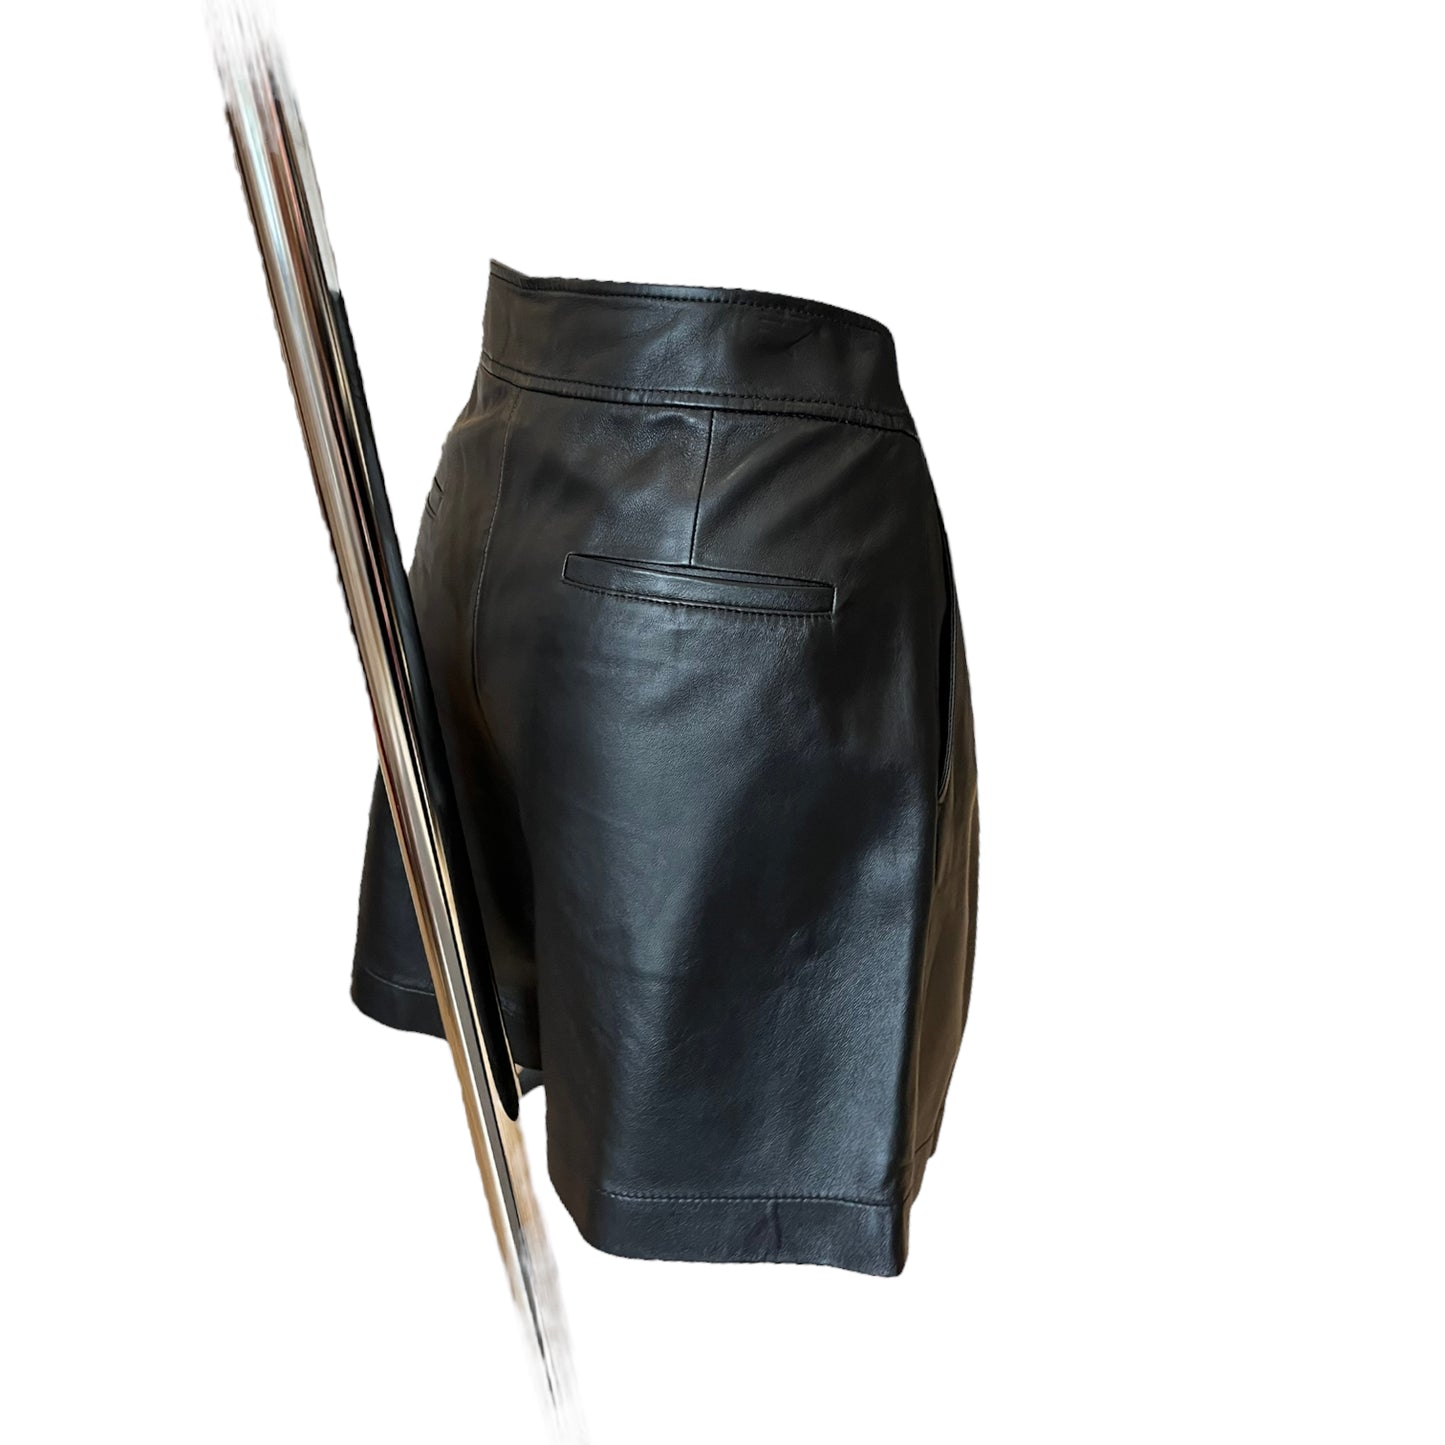 NEW Sports Max Black Leather Shorts